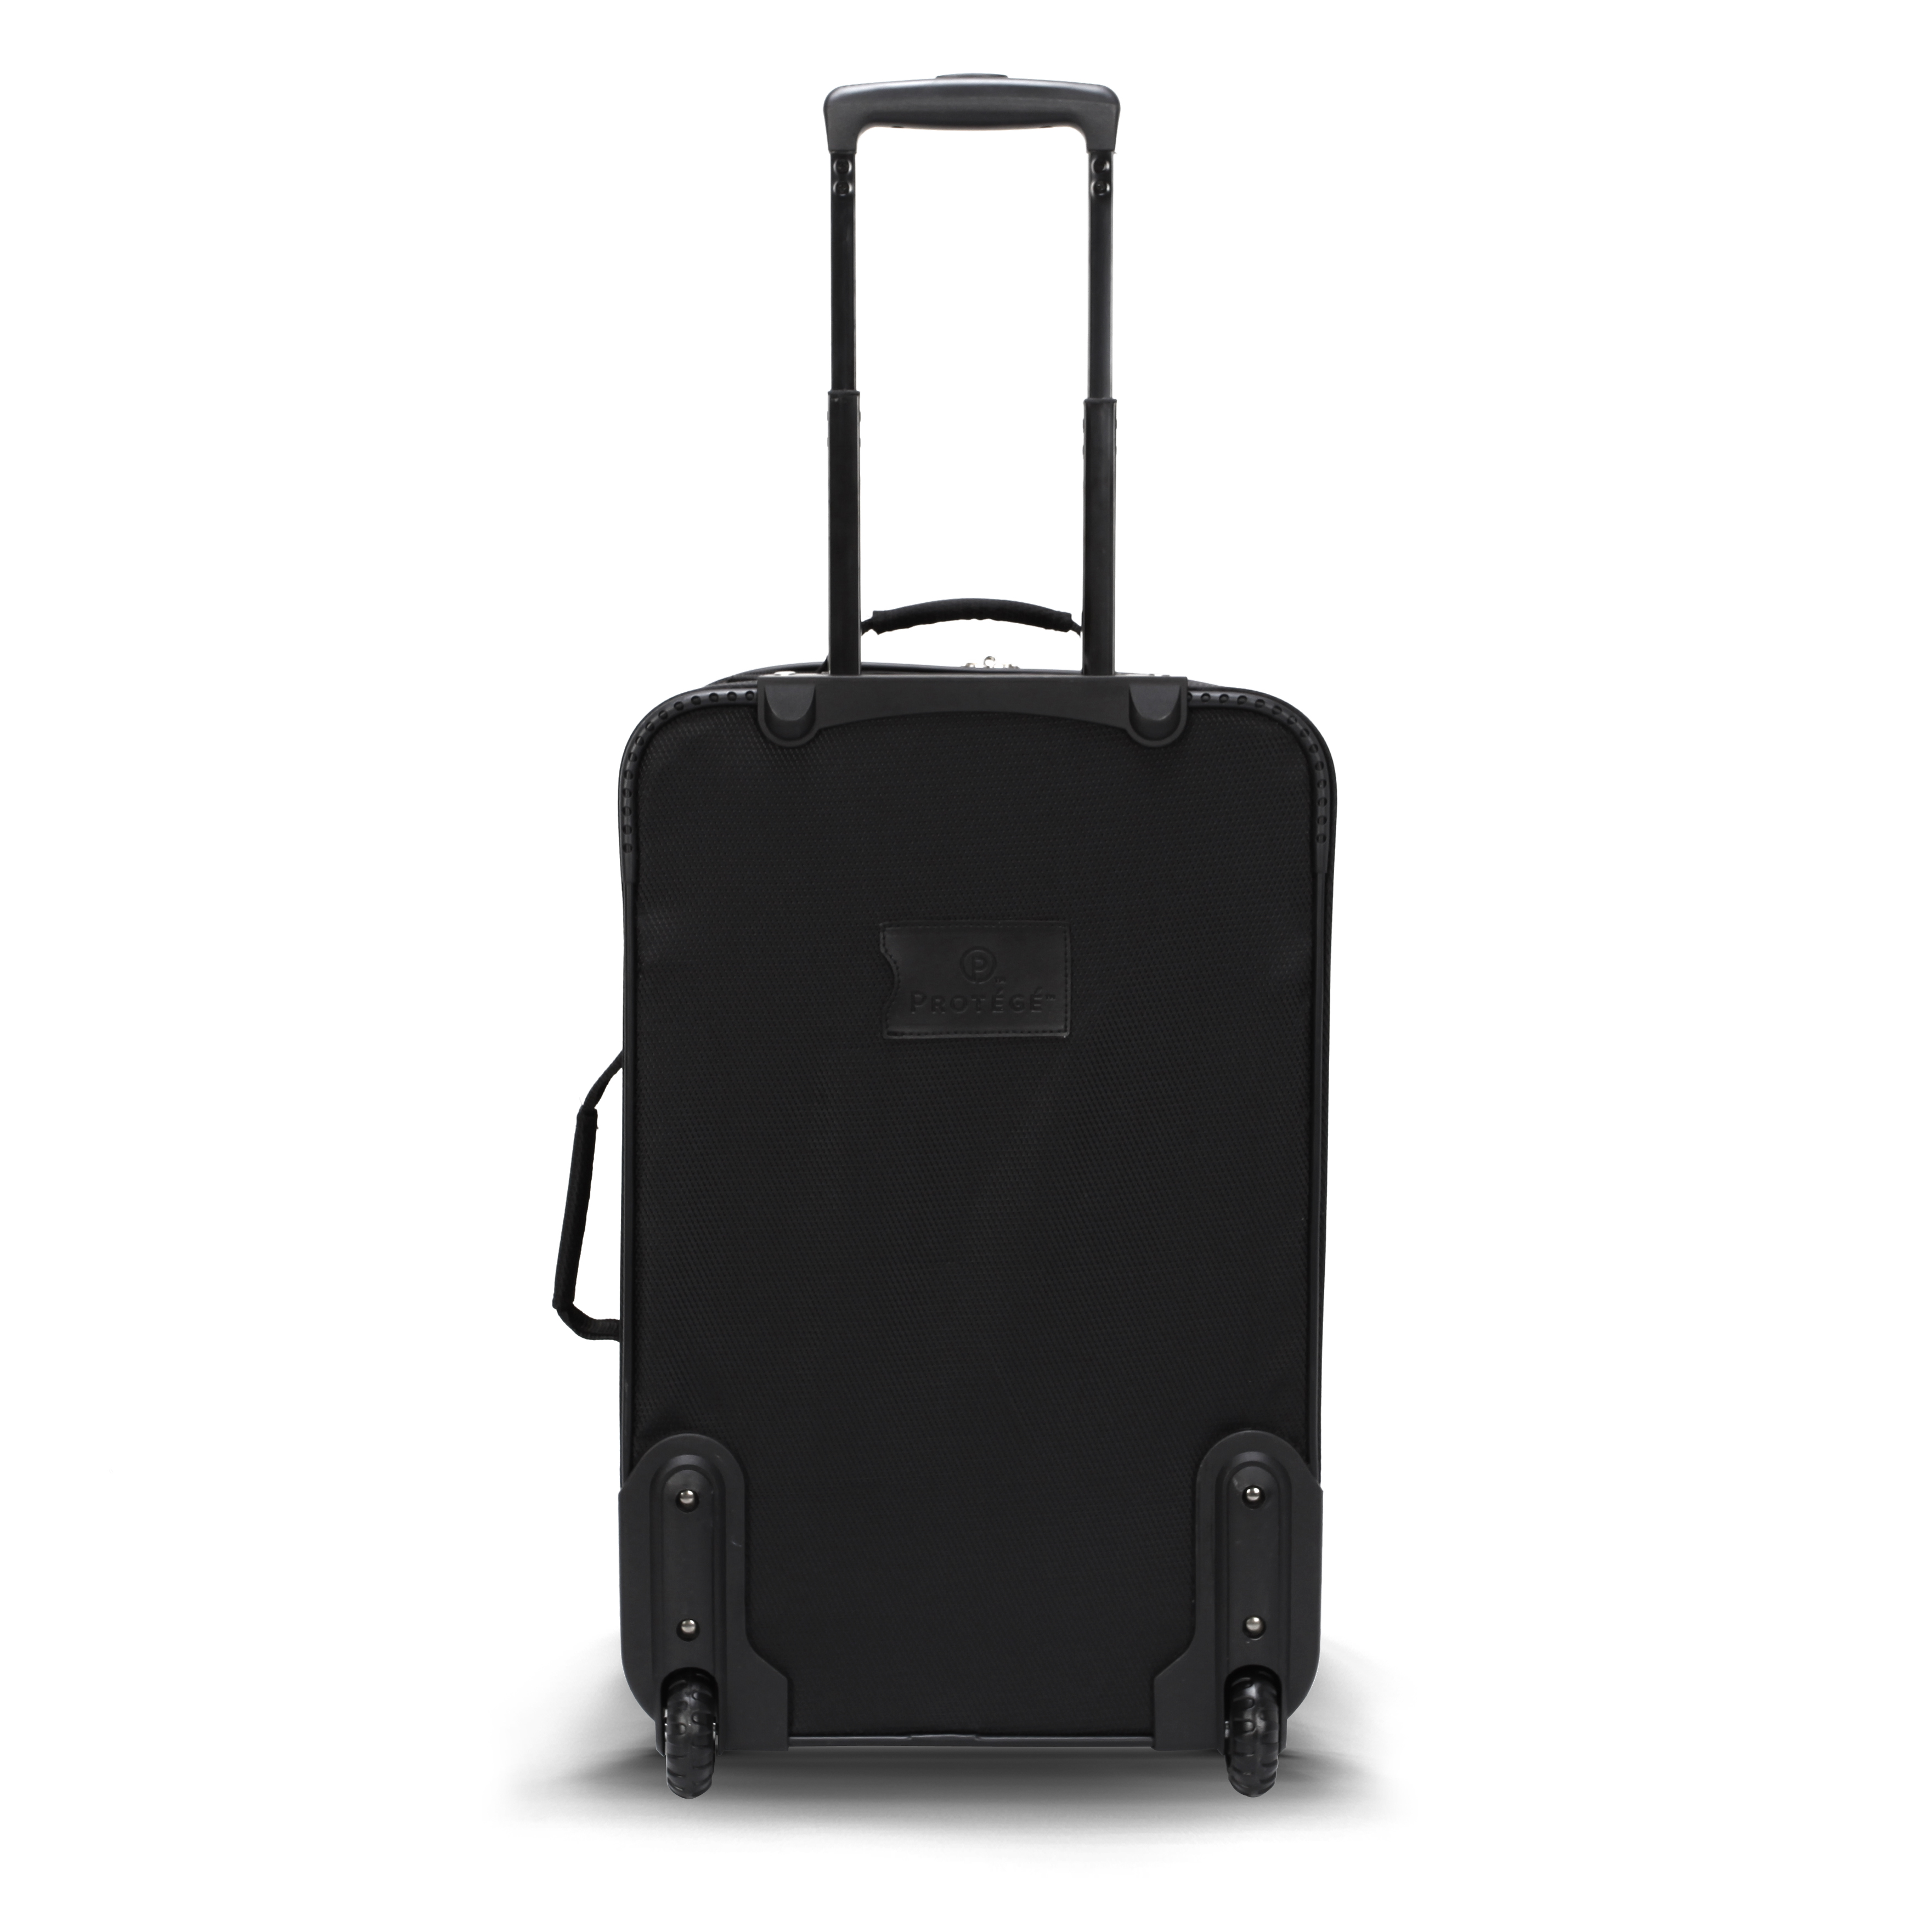 Protege 21" Regency Carry-on 2-Wheel Upright Luggage (Walmart Exclusive), Black - image 2 of 5